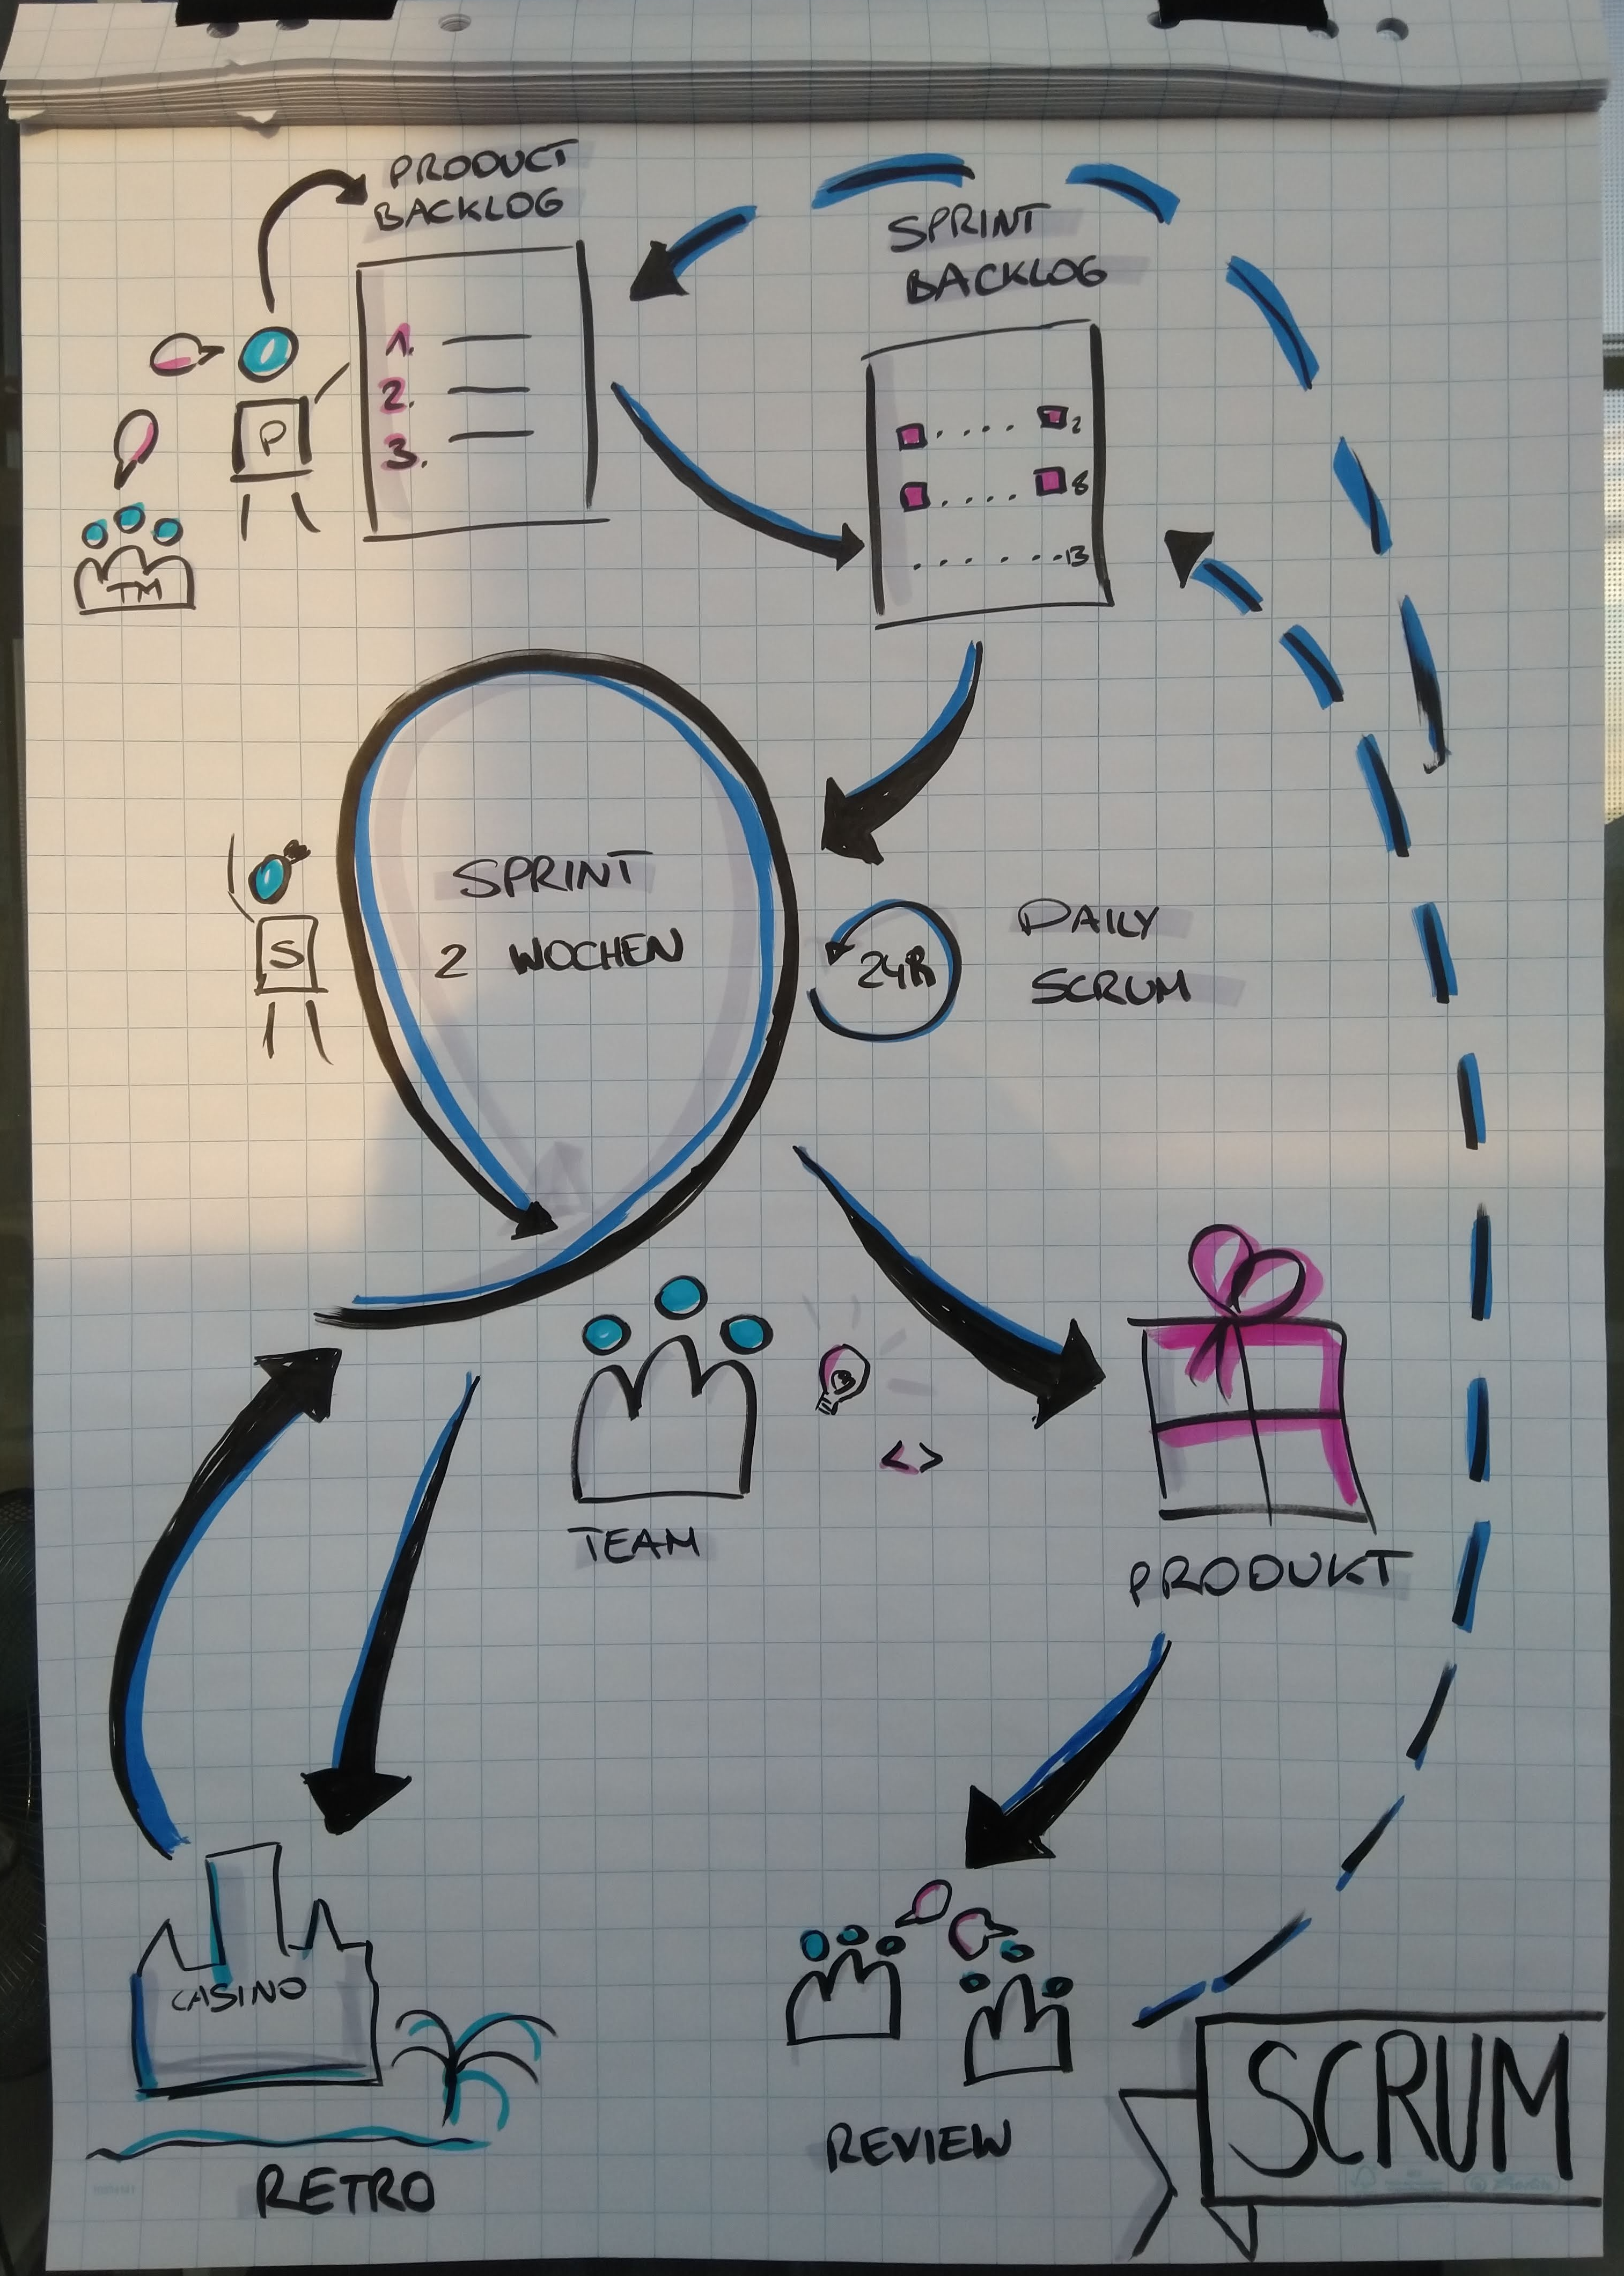 Visualisation of a Scrum process